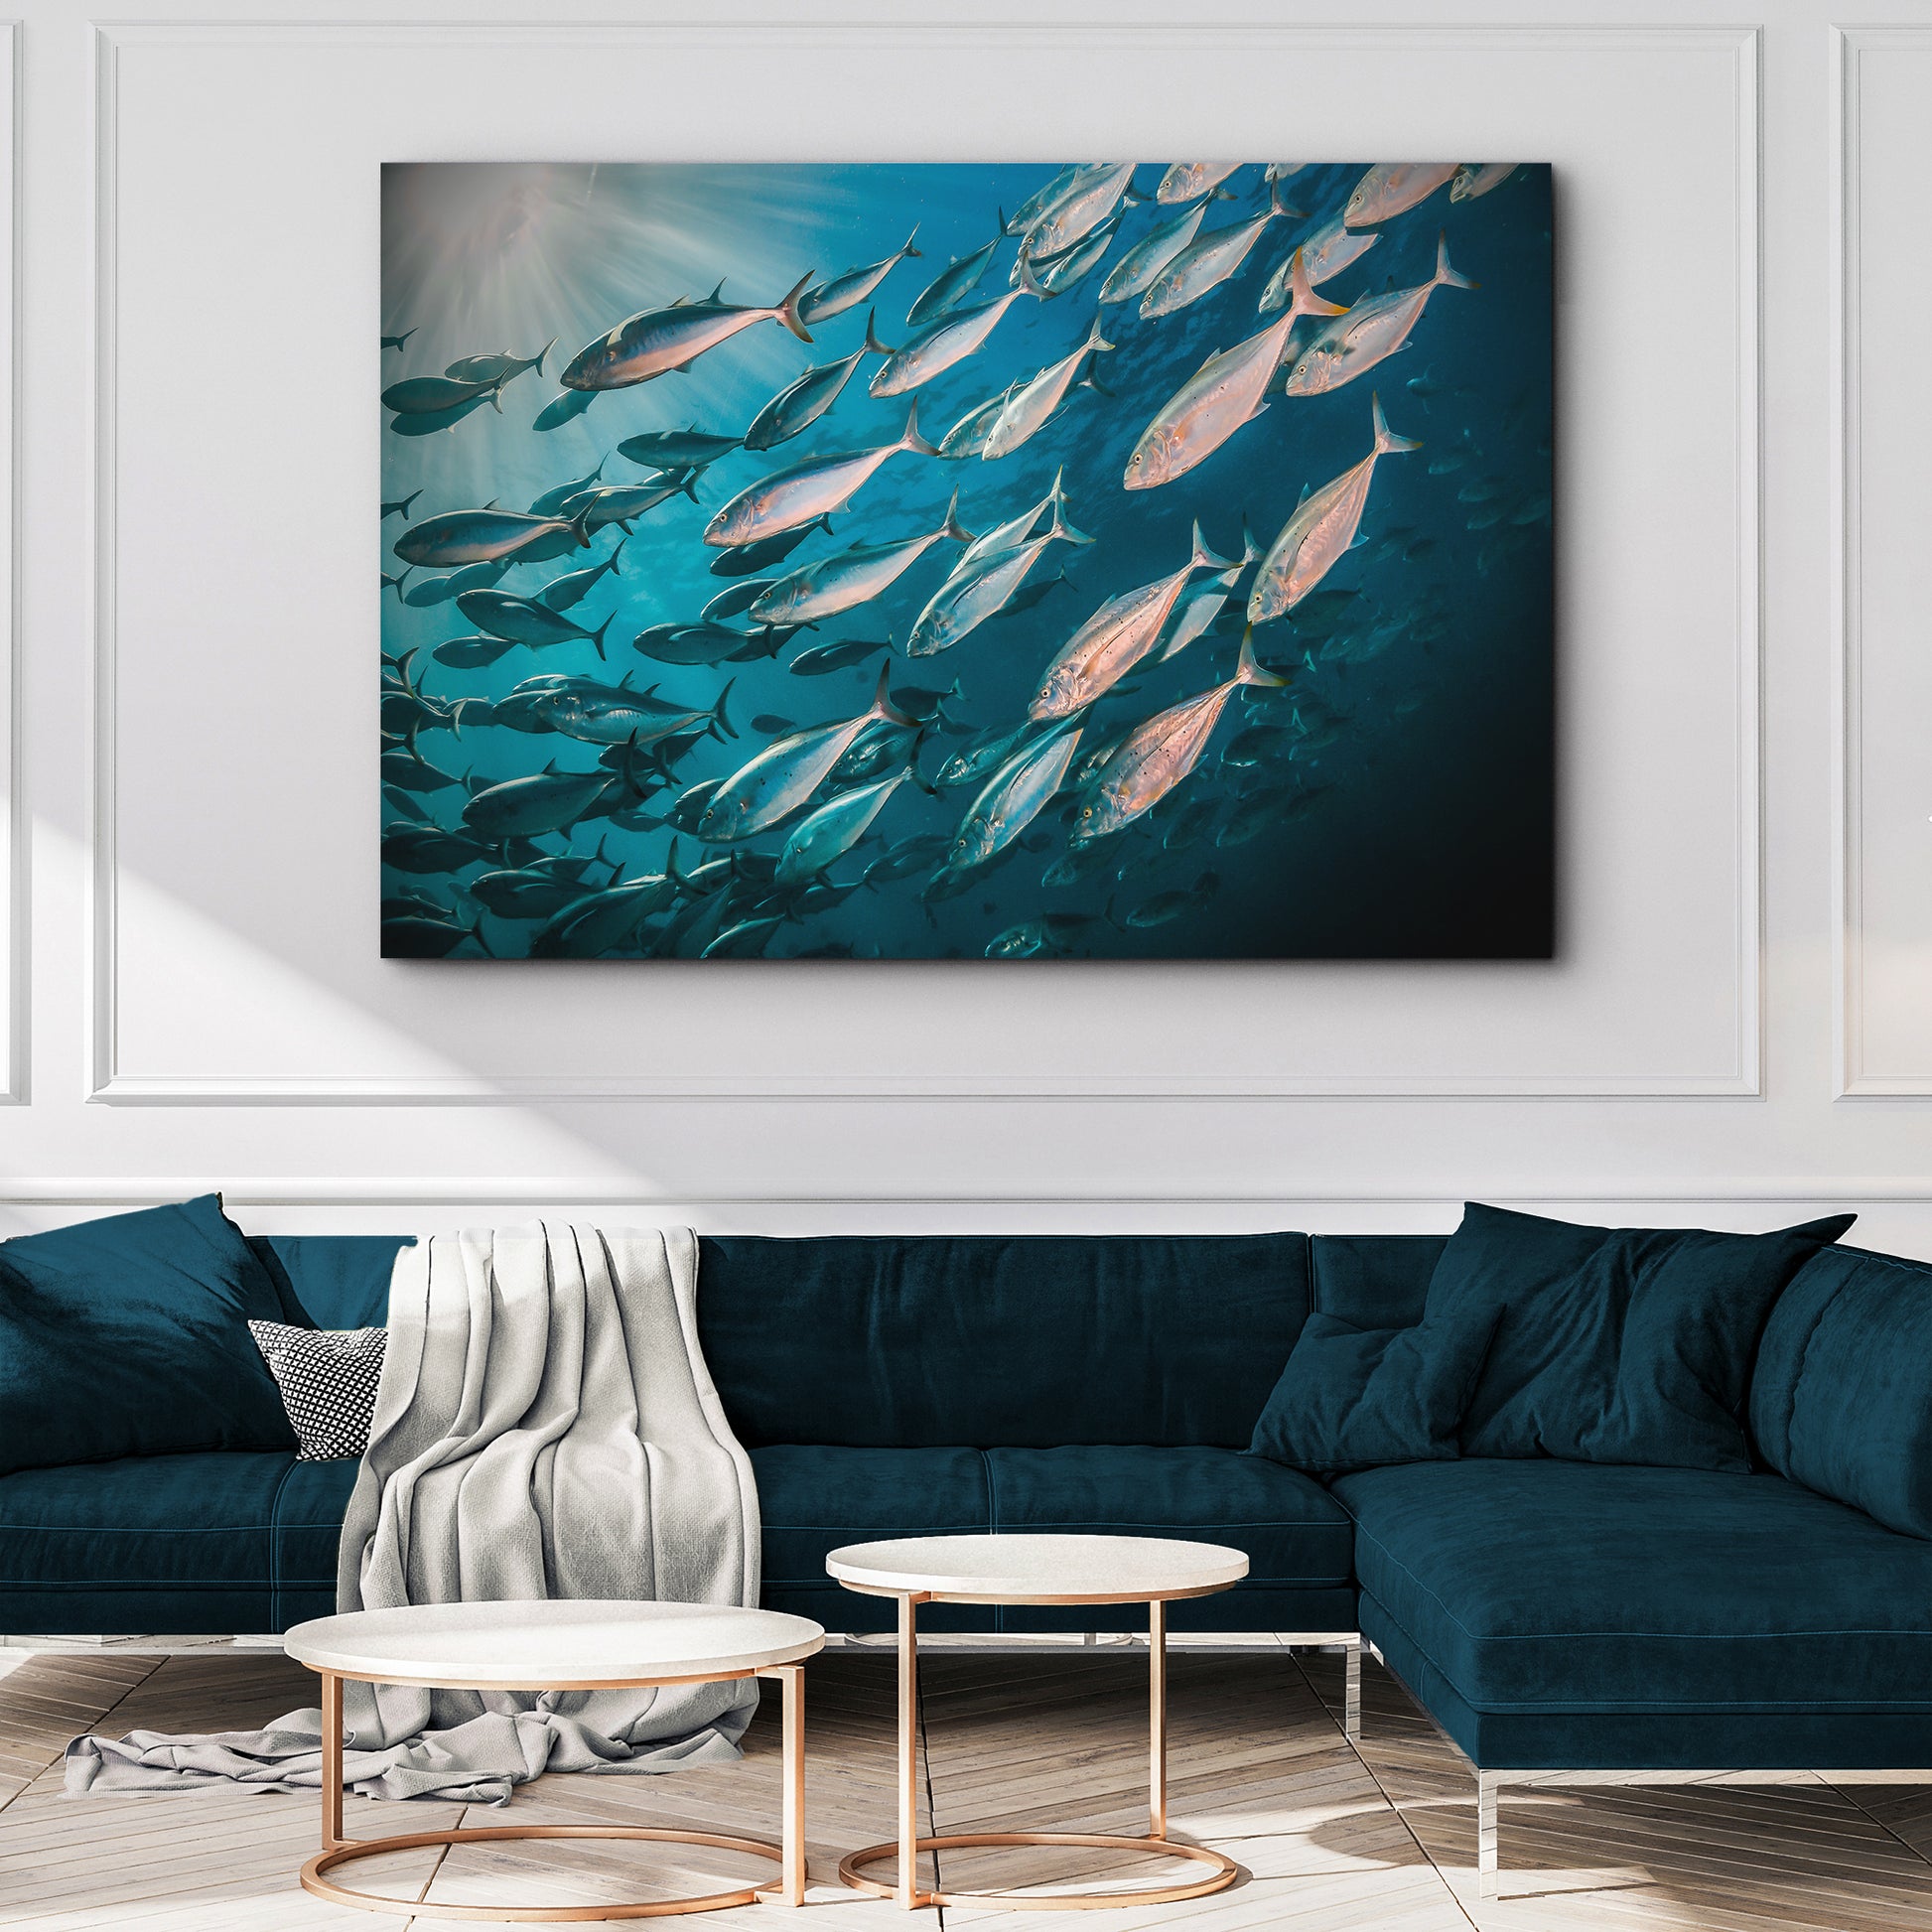 Vibrant Ocean Fish Wall Art II - Image by Tailored Canvases